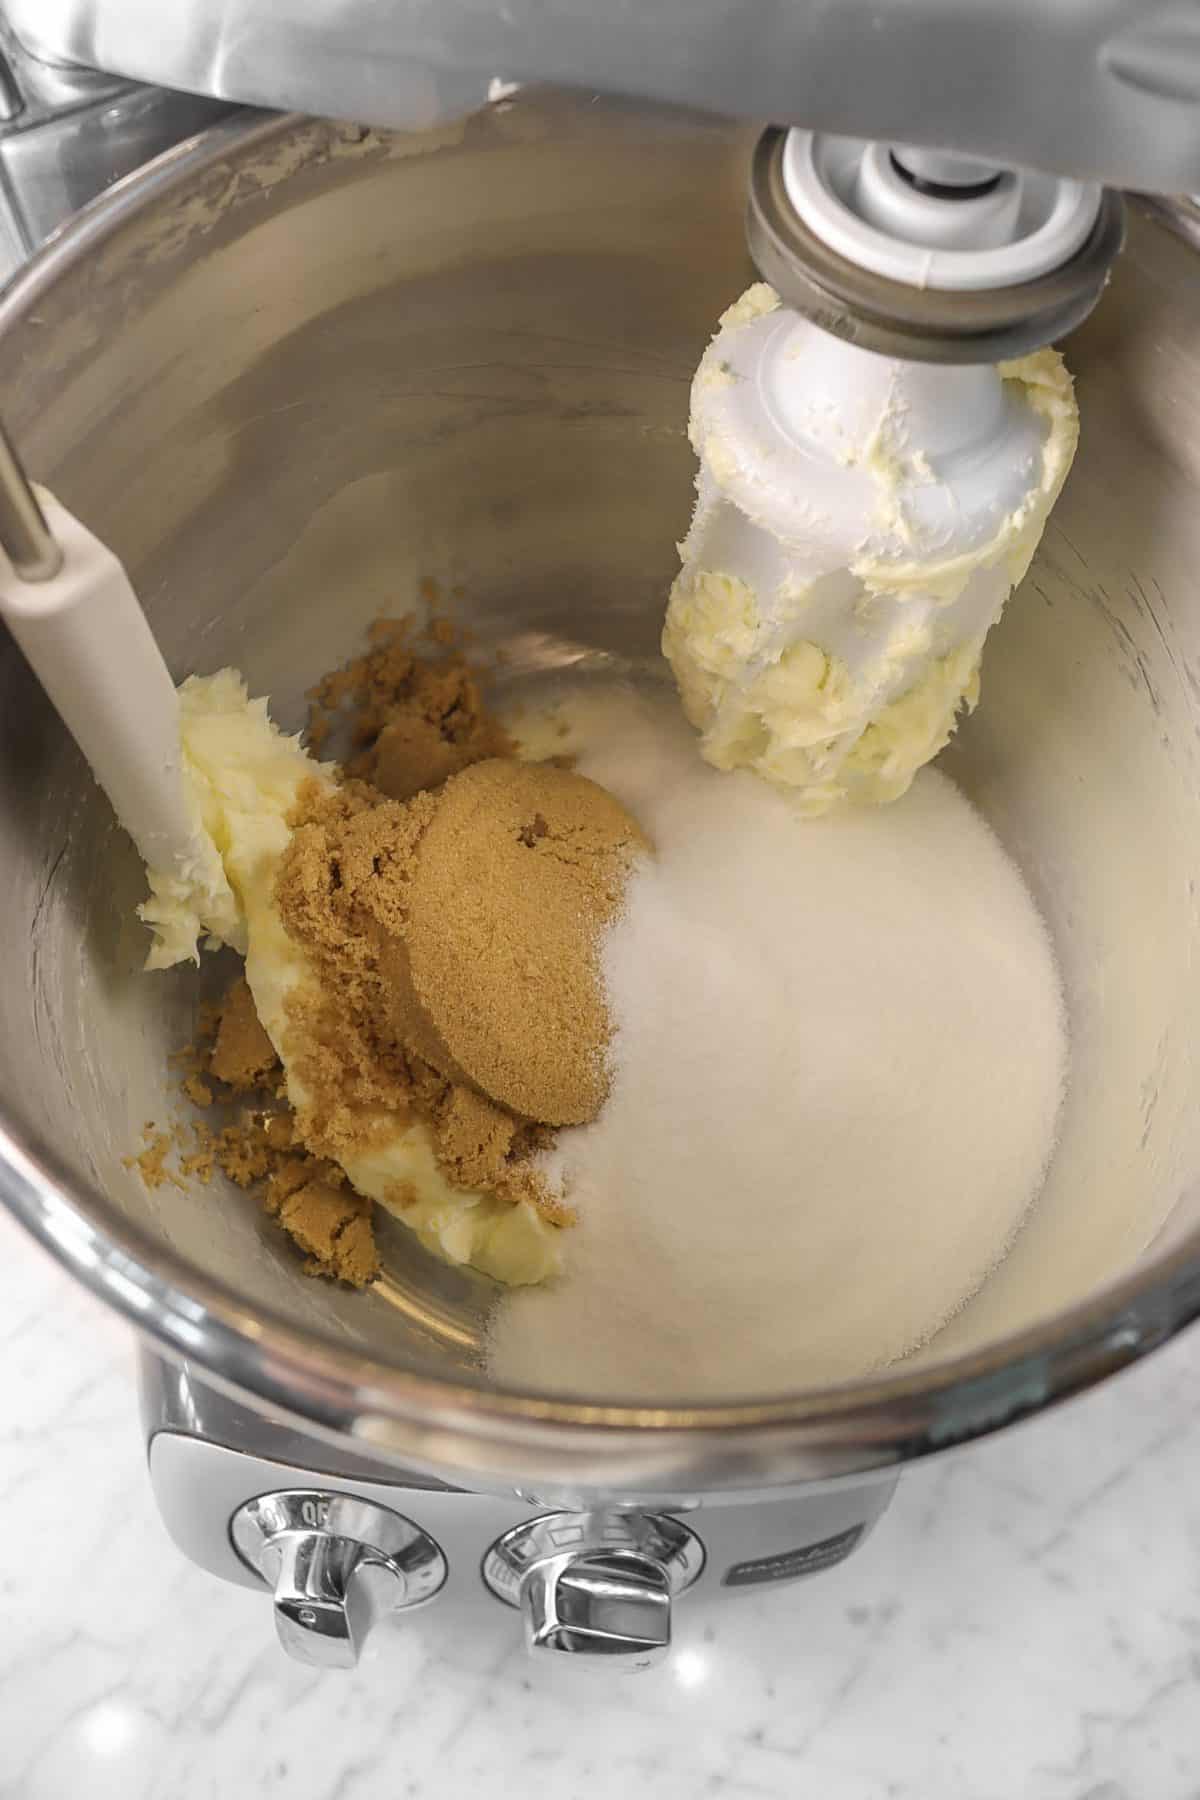 brown sugar and sugar added to butter